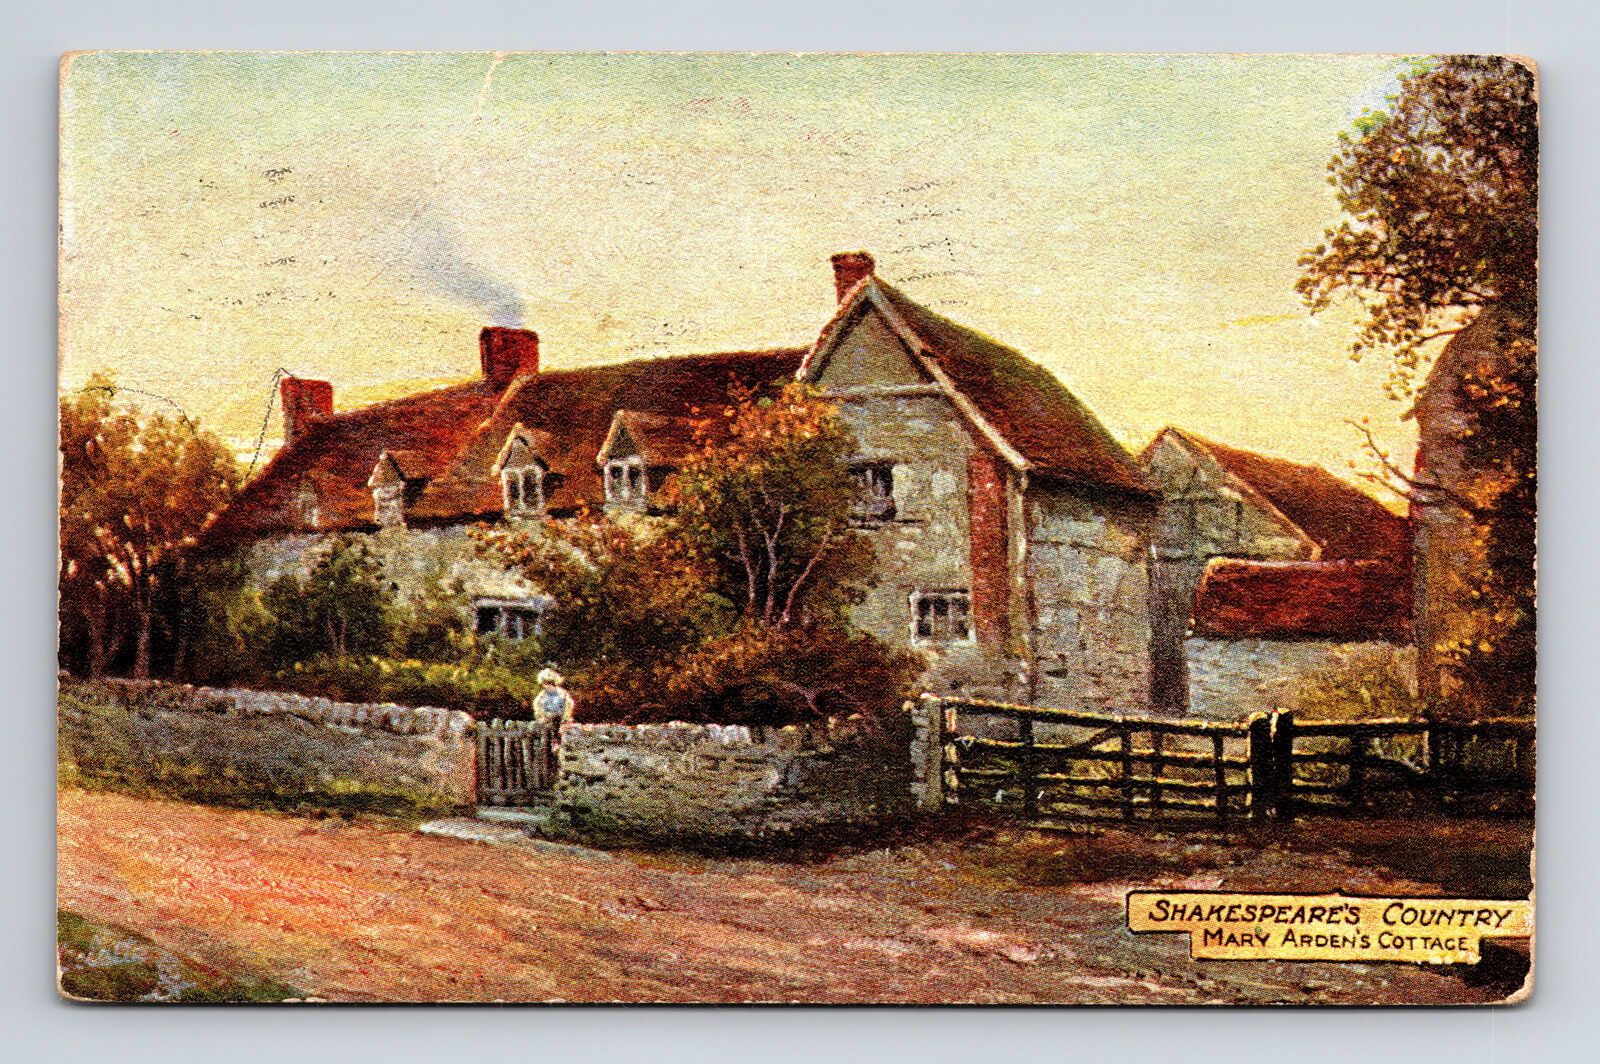 c1907 Mary Arden's Cottage Shakespeare's Country Raphael Tuck's Oilette Postcard